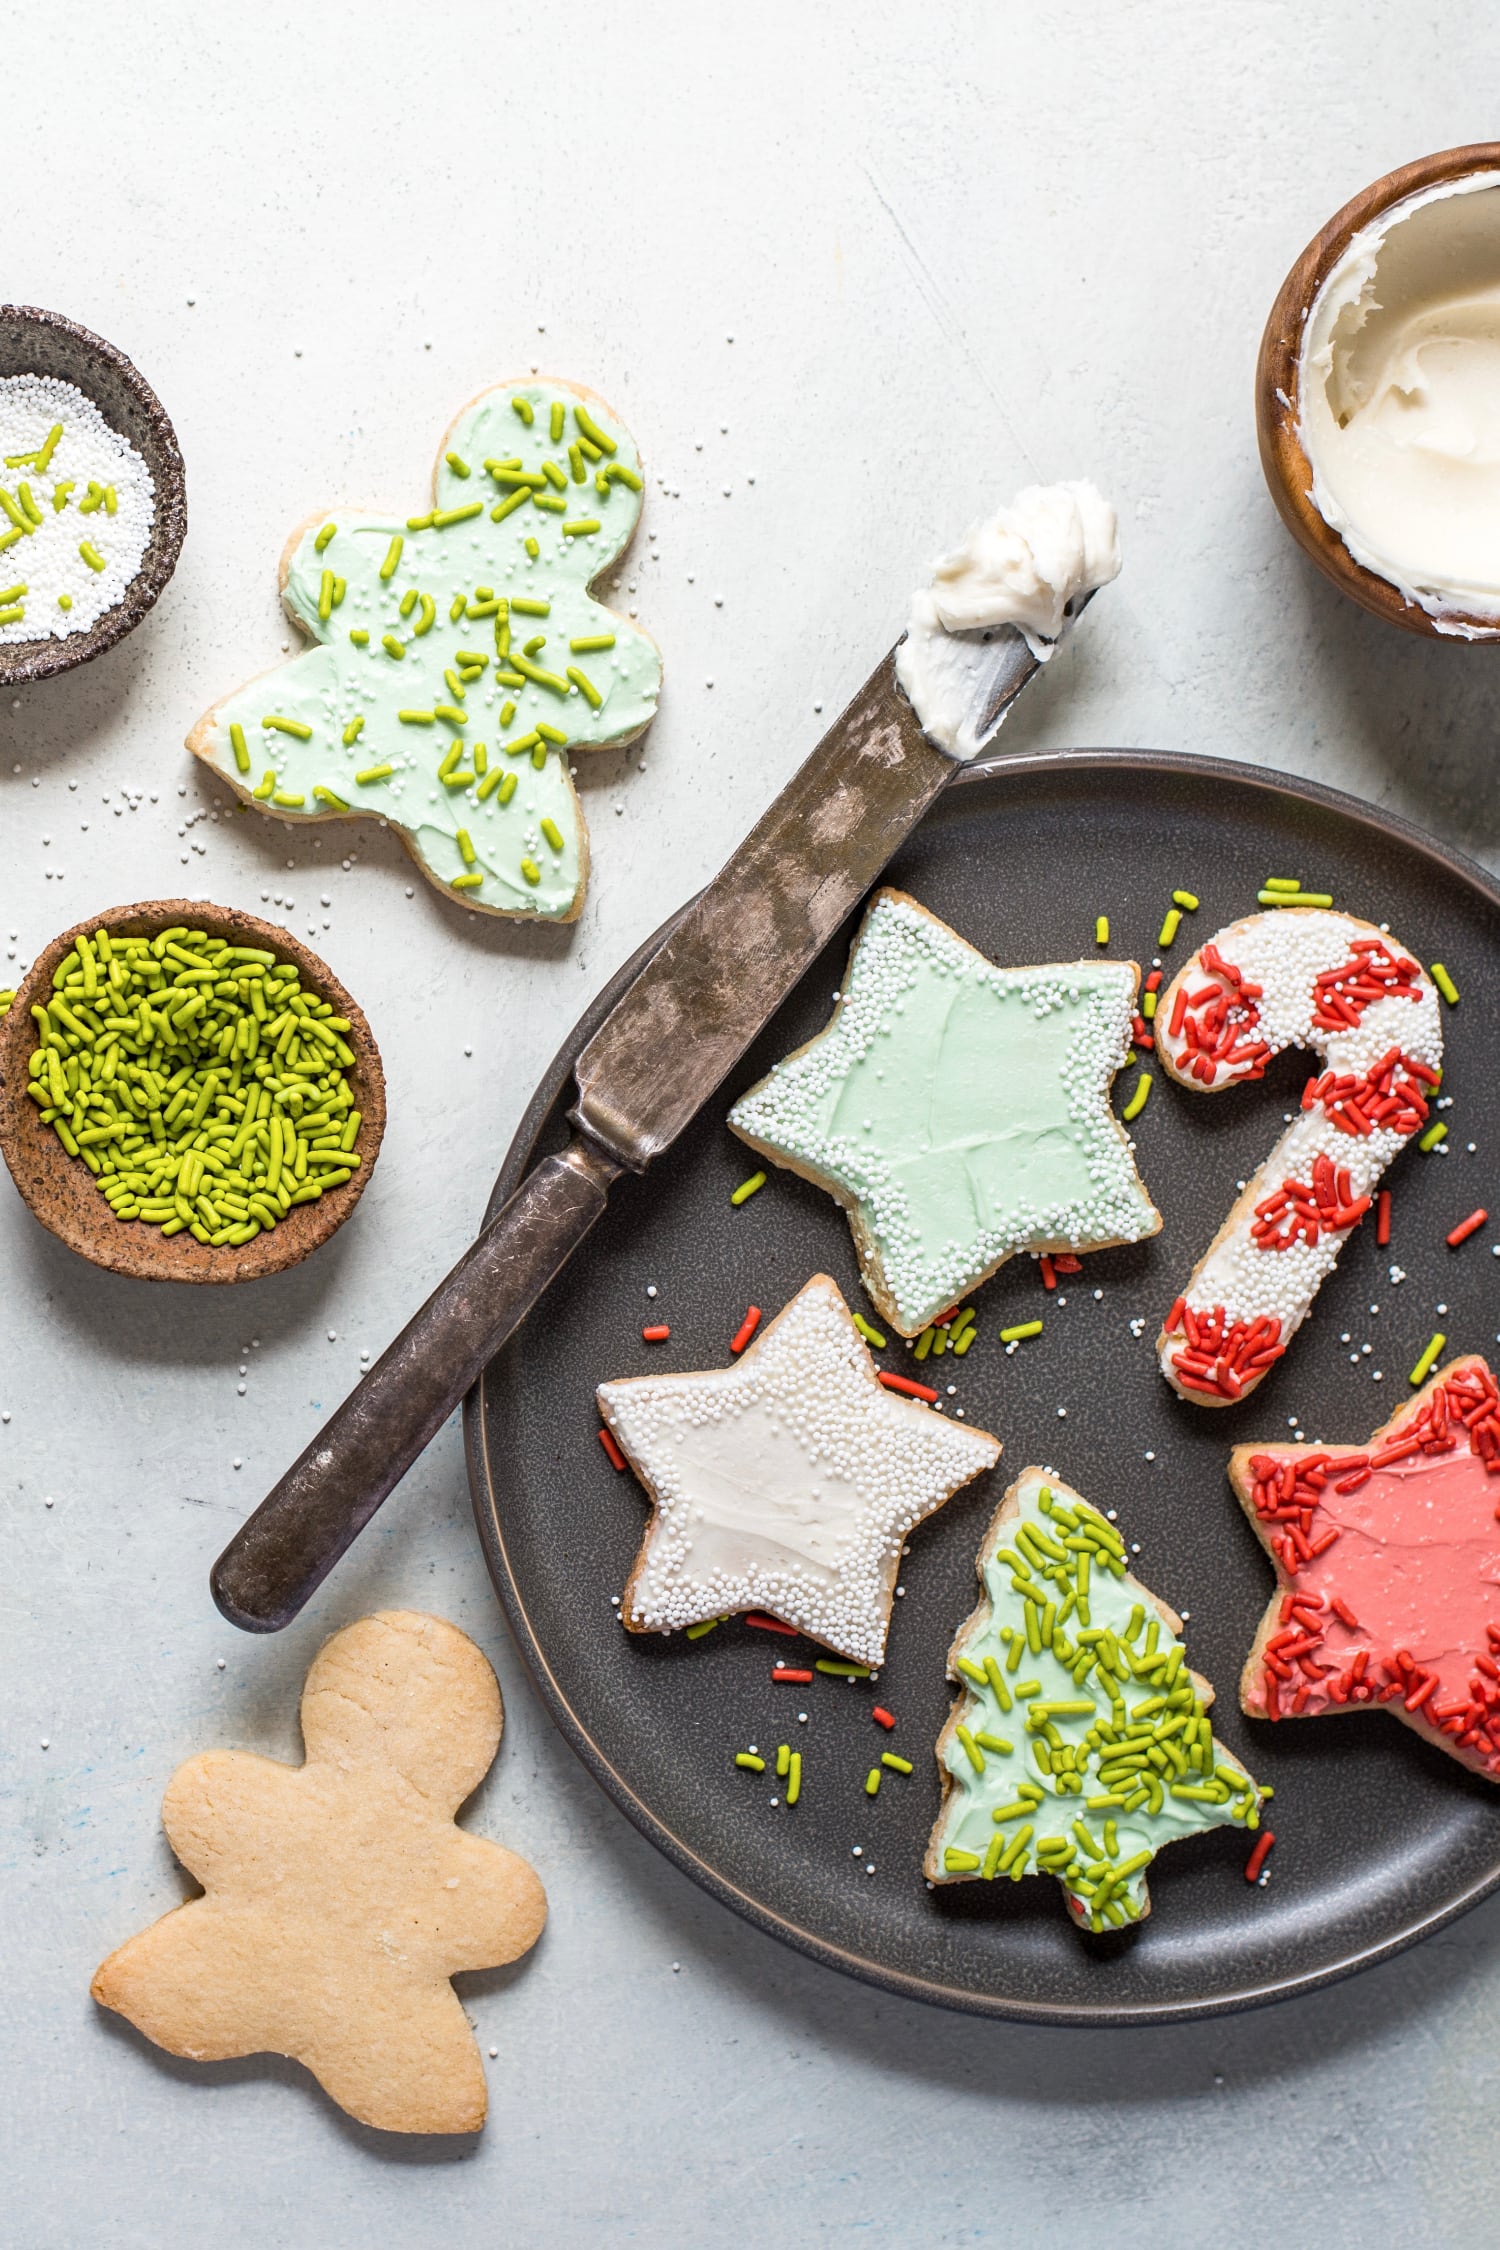 decorating sugar cookies with naturally colored frosting